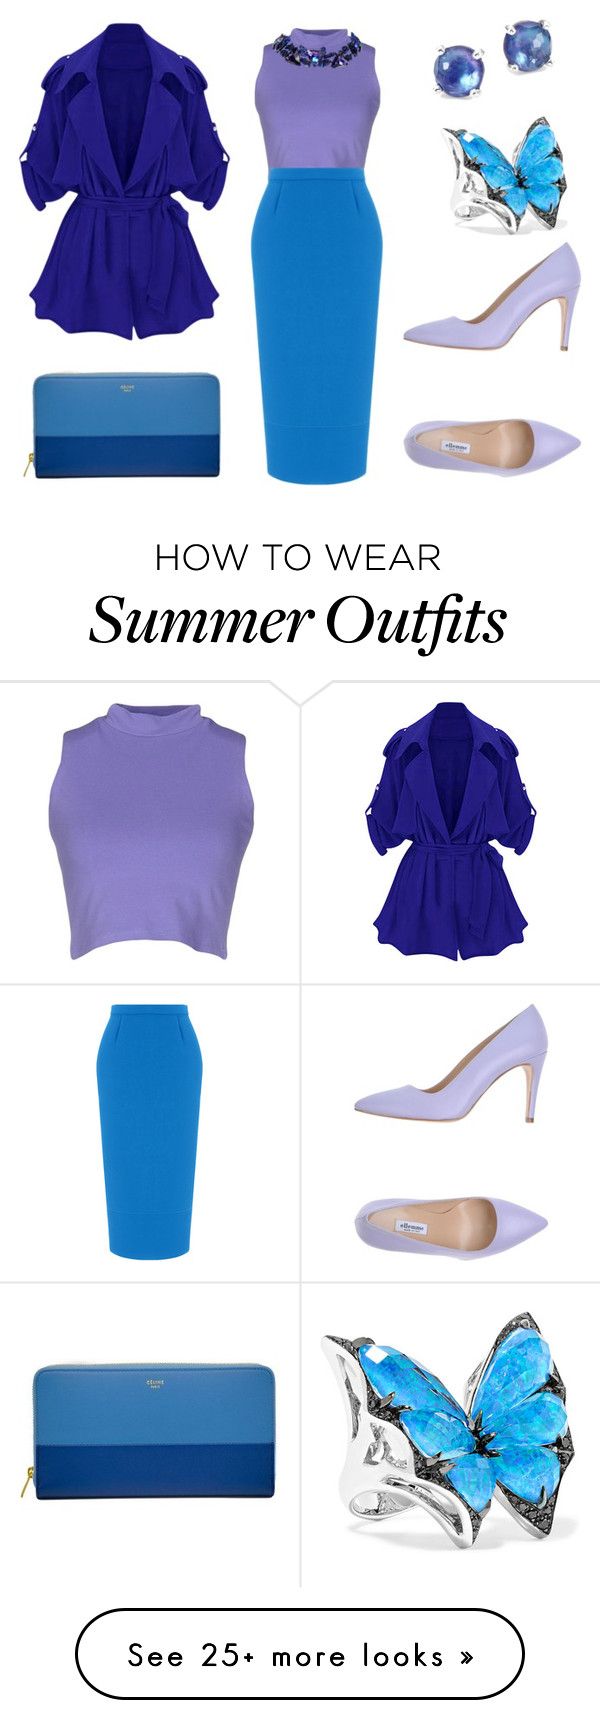 "025. Evening Classics outfit for Light Summer color type" by sollis o...